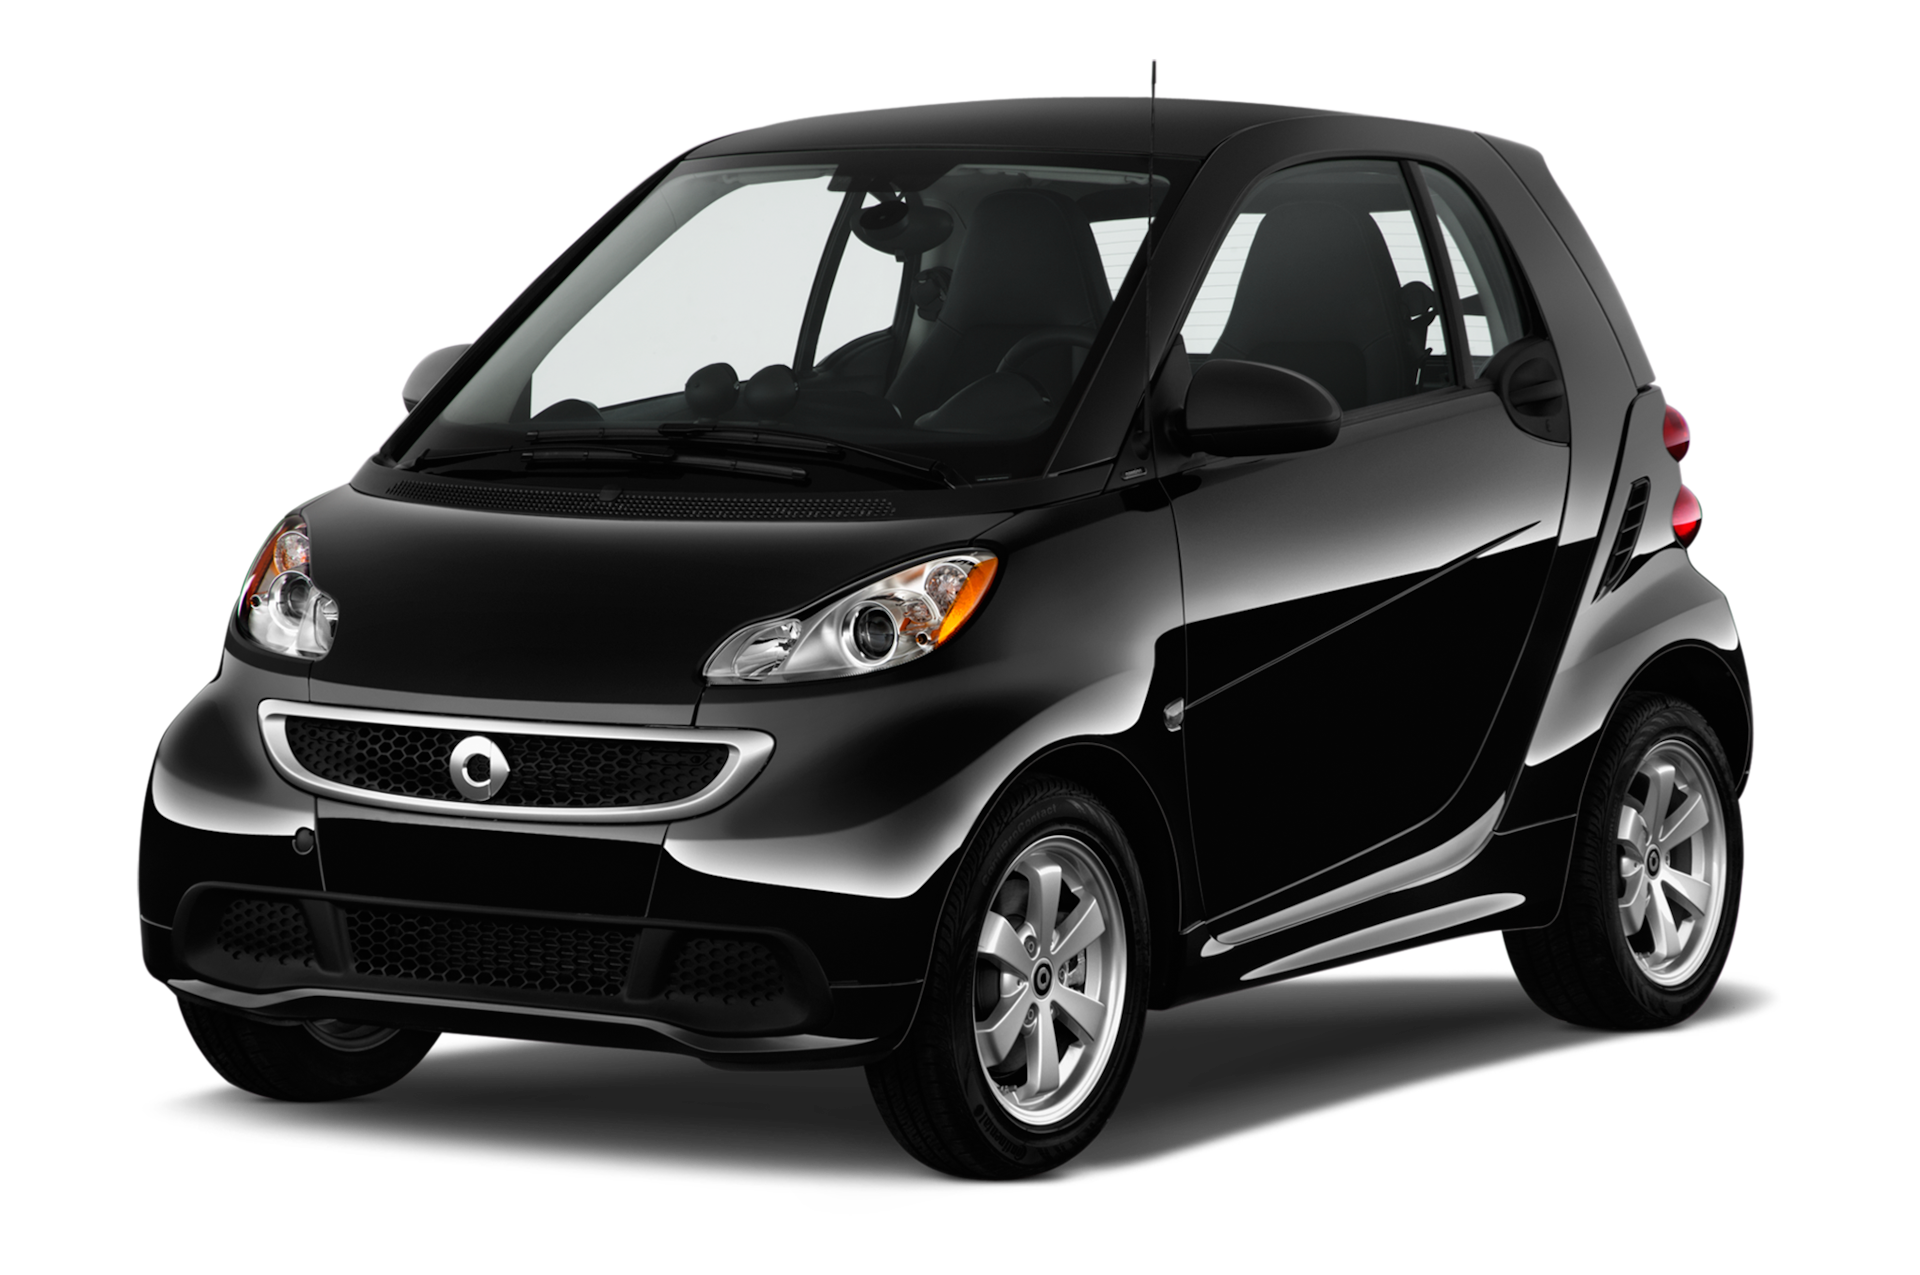 2015 Smart Fortwo Prices, Reviews, and Photos - MotorTrend